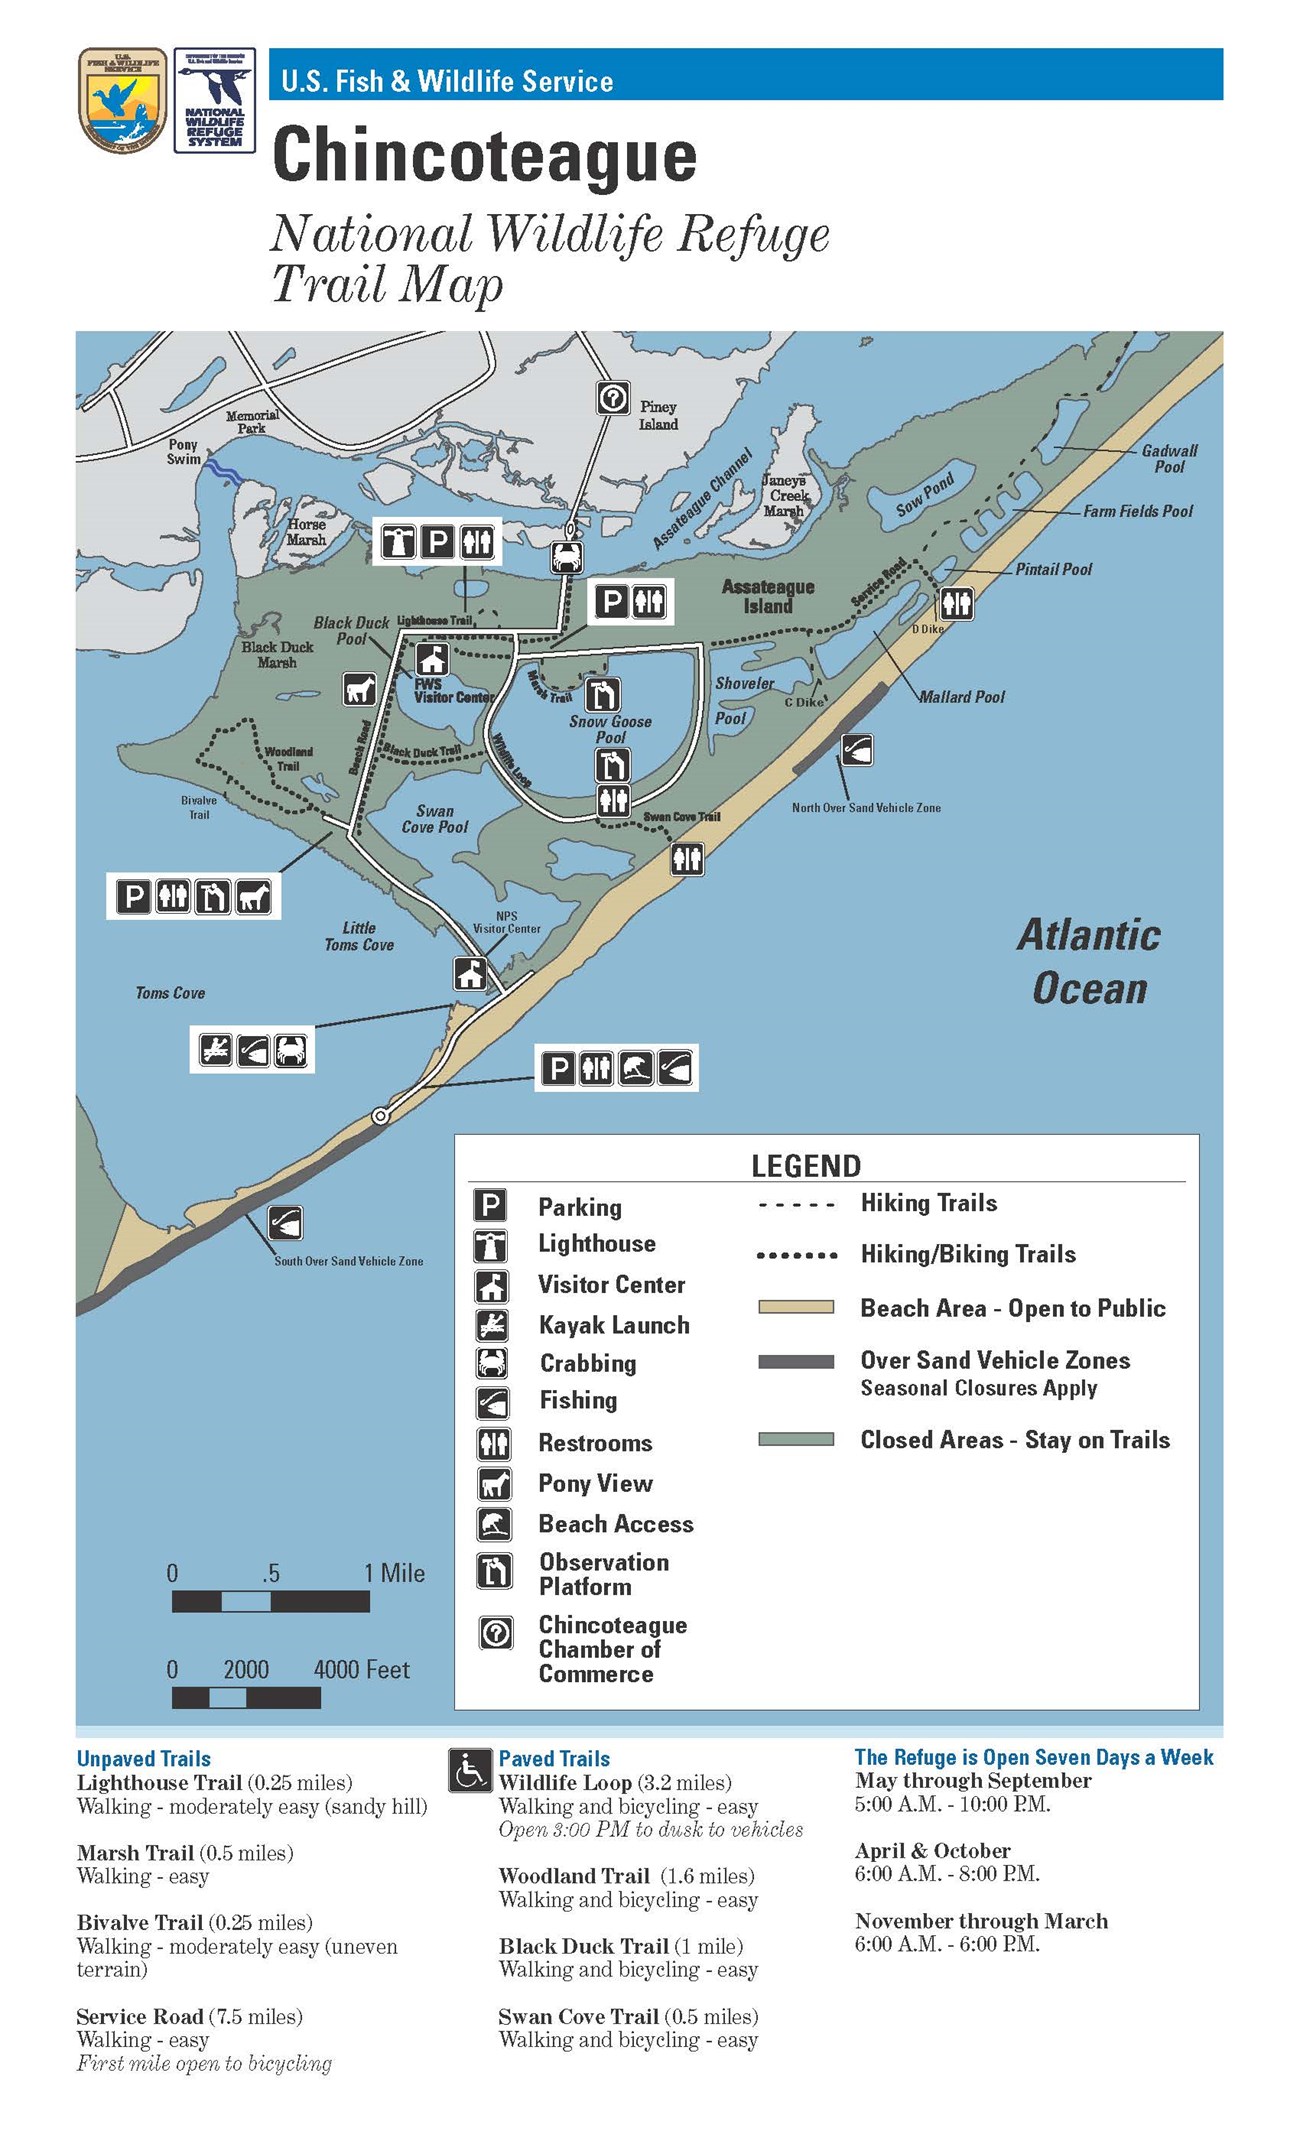 Trail map for the Chincoteague National Wildlife Refuge